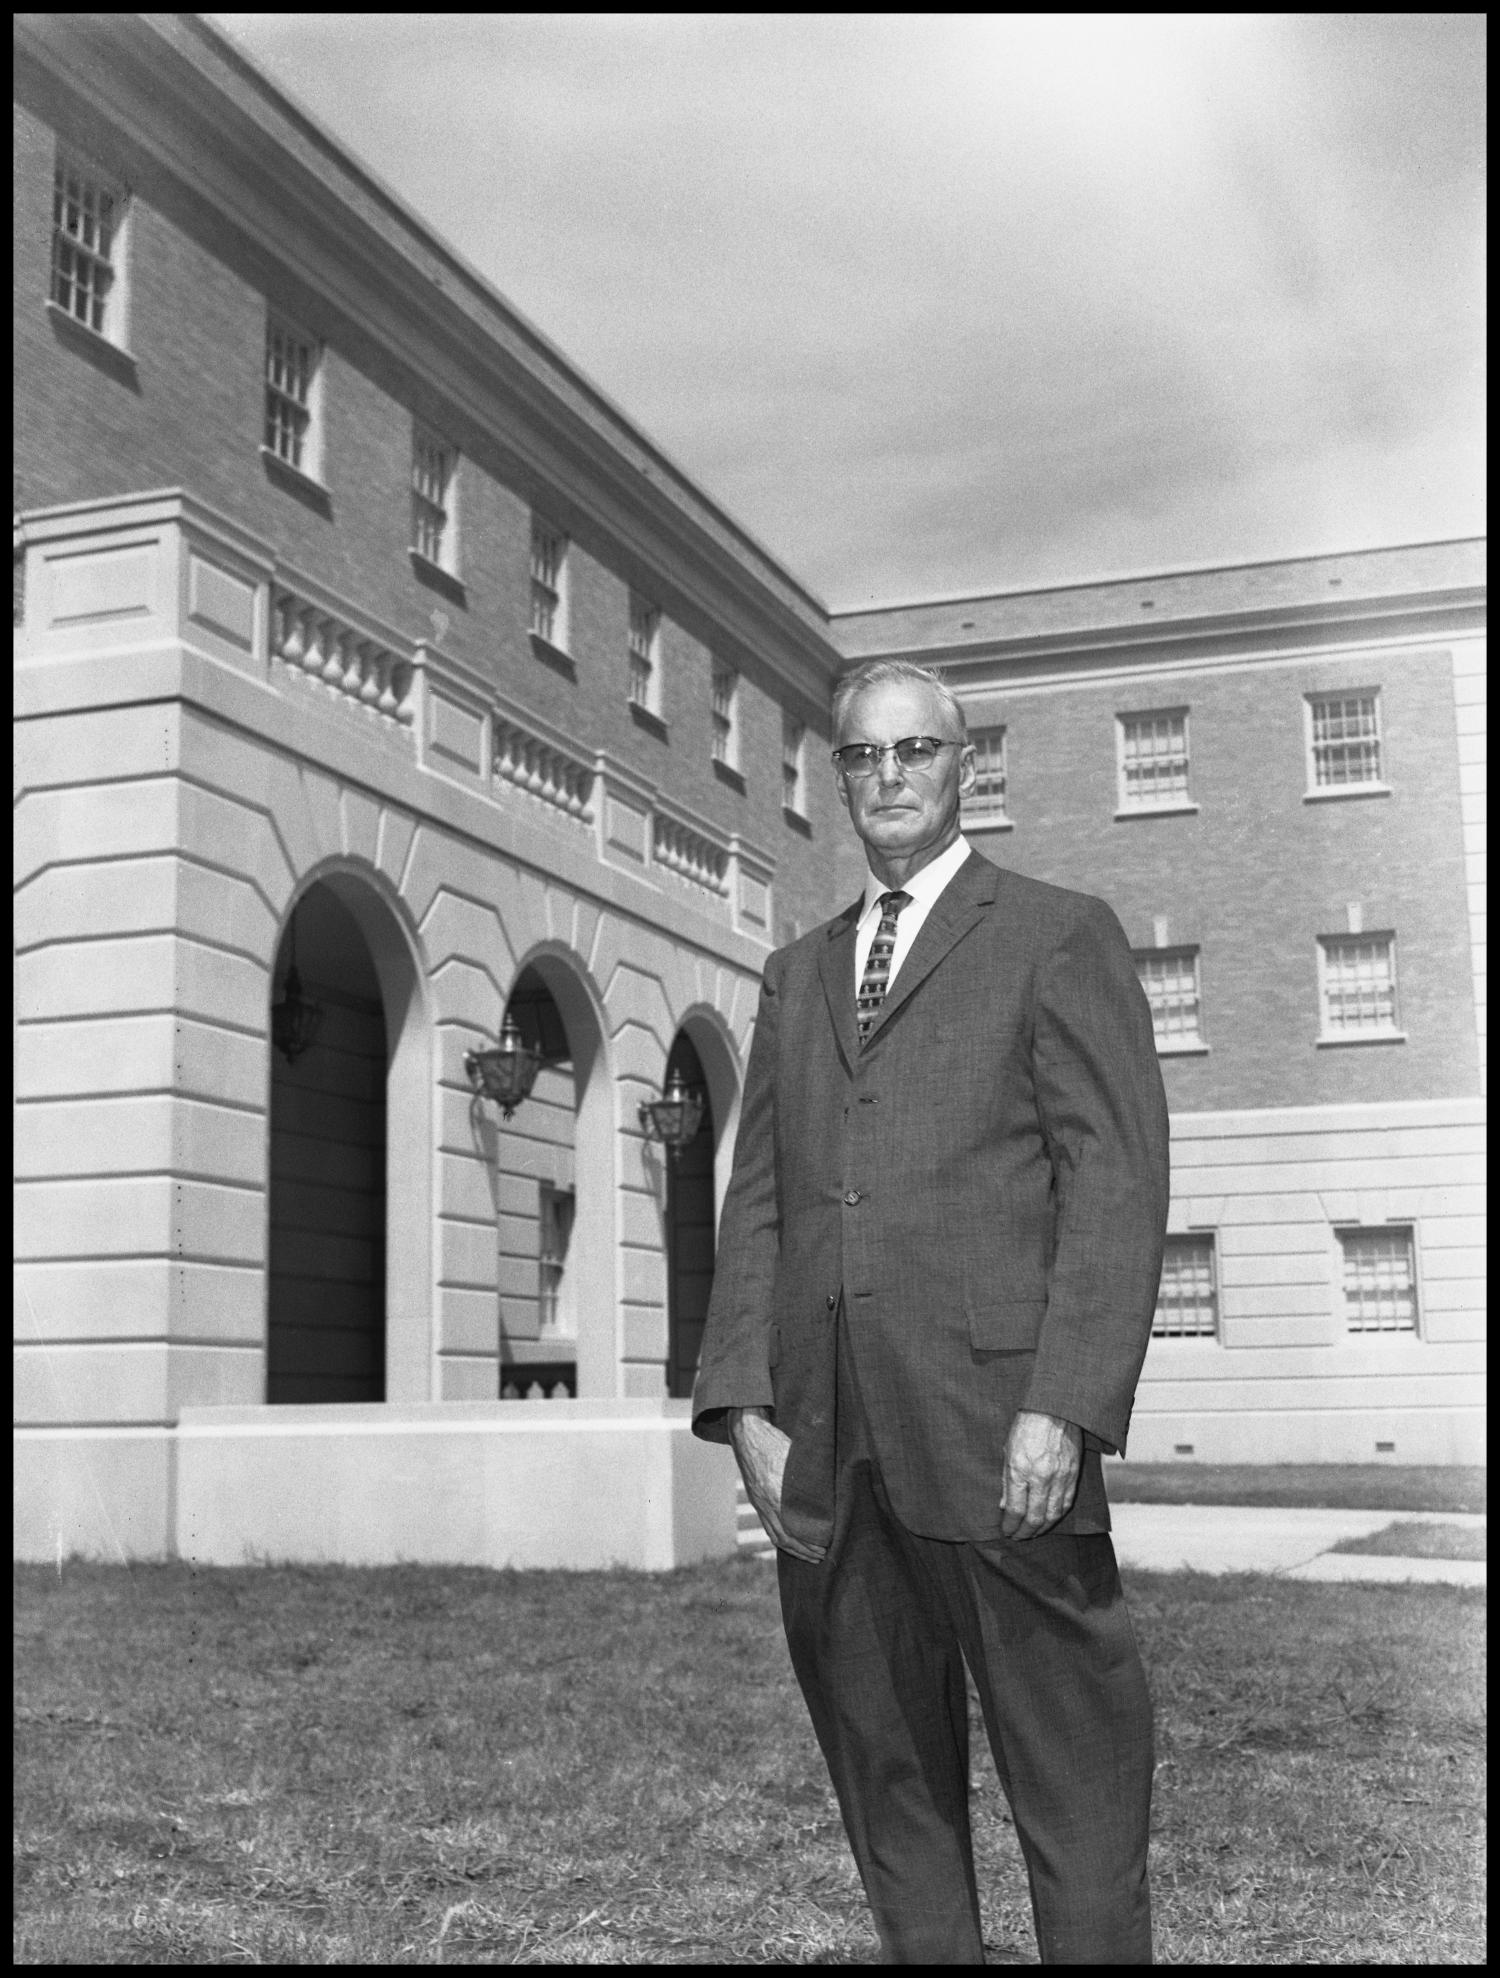 Curry, O. J. - Business Administration Dept. - Outside Campus Building - Portrait Close Up
                                                
                                                    [Sequence #]: 1 of 1
                                                